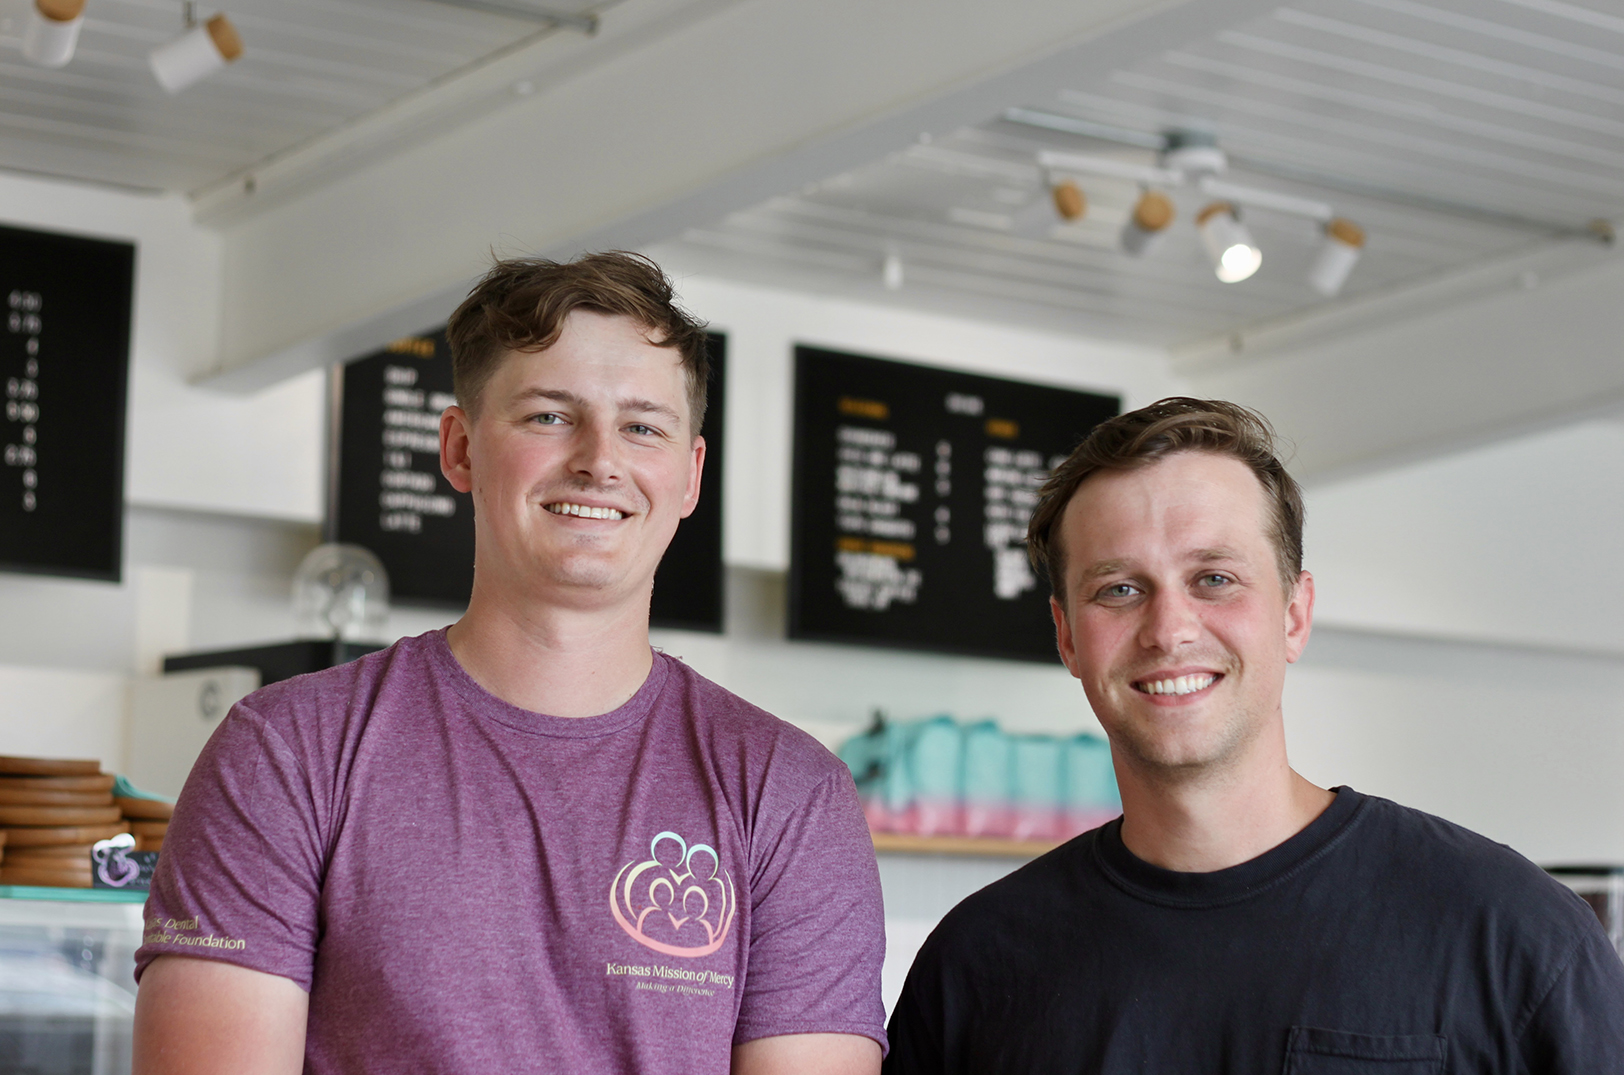 Full circle: Coffee shop and cocktail bar serve hometown hangout vibes thirsty locals won’t want to leave